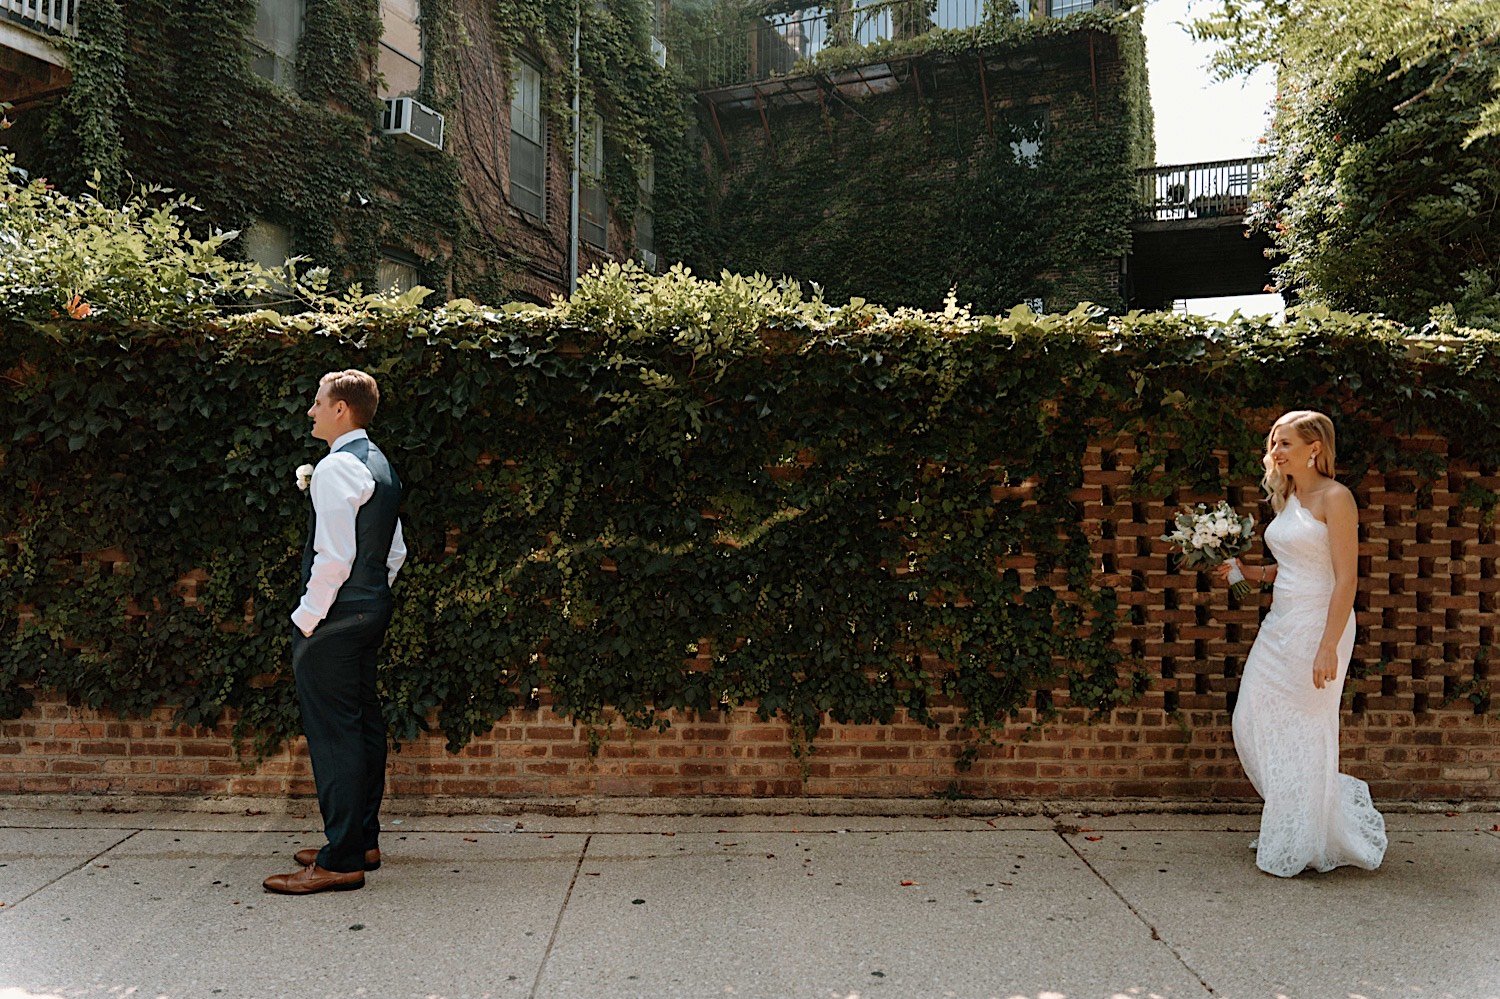 Bride walking up behind groom to surprise him with a first look in front of a vine covered brick wall